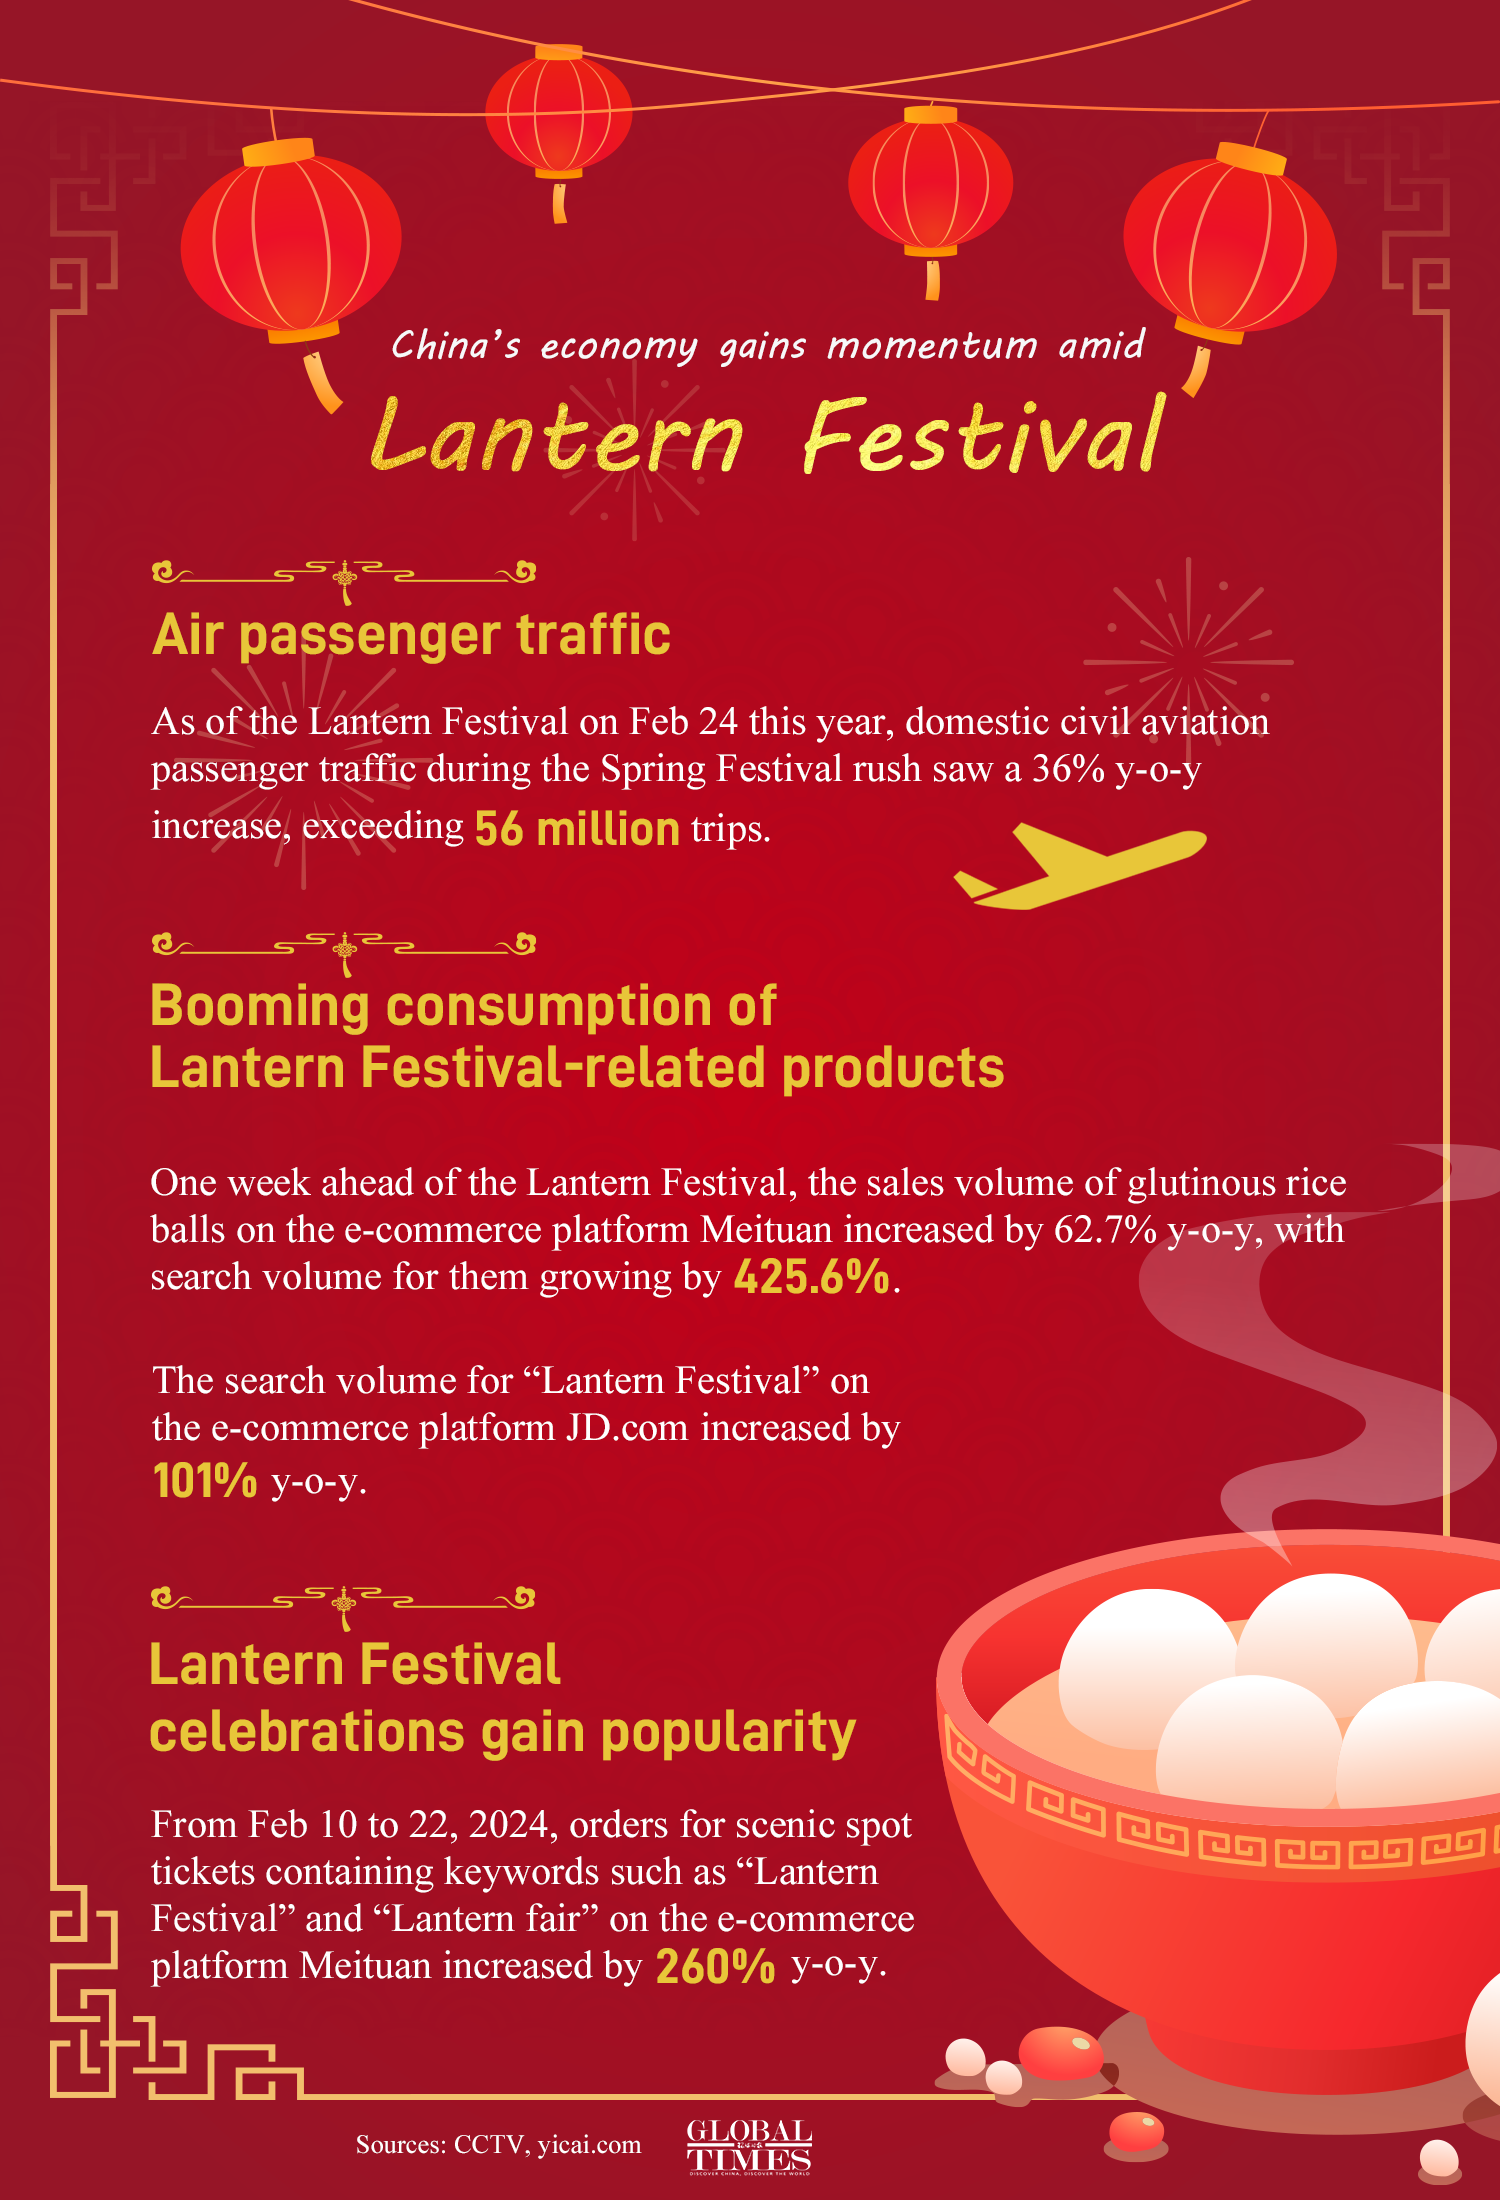 With surging air passenger traffic and booming online sales, China’s economy gains momentum during this year's Lantern Festival. Graphic:GT